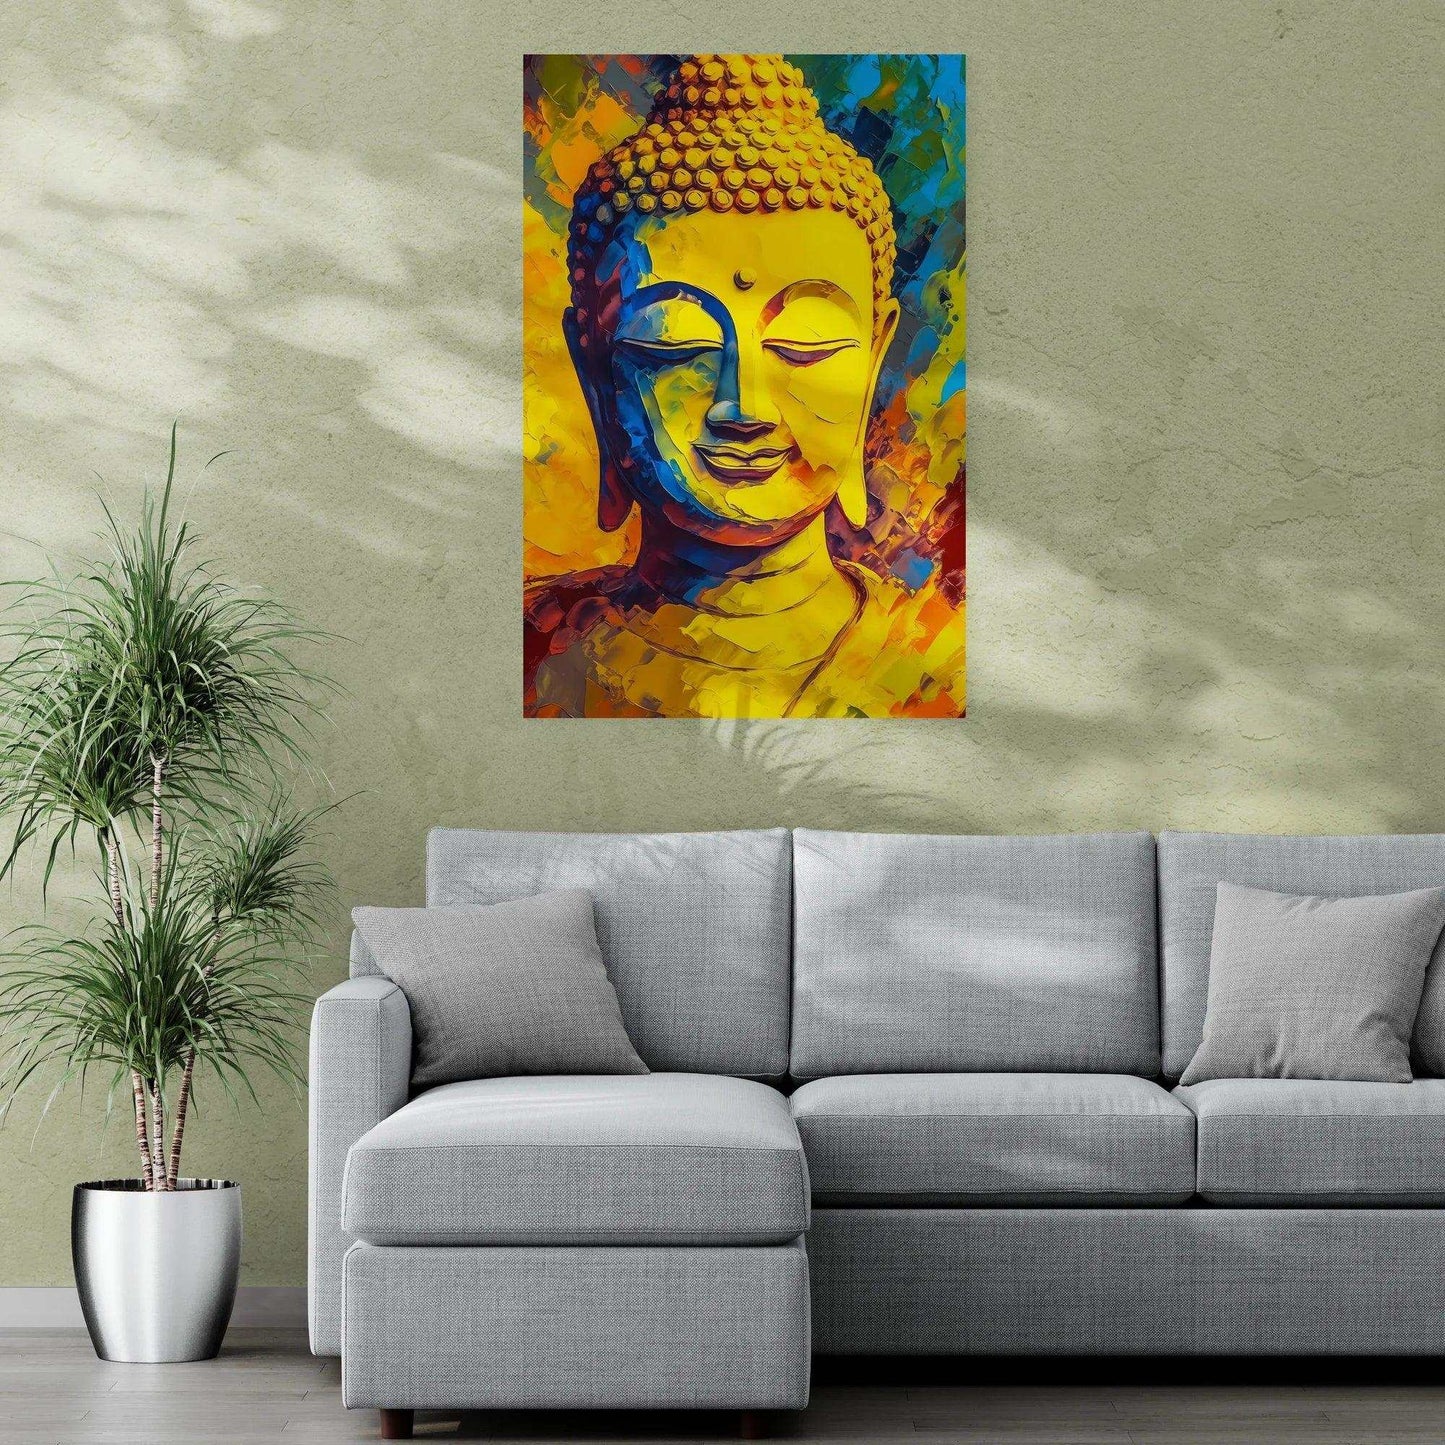 A colorful Buddha portrait with abstract blue and orange details hangs on a textured wall, adding a touch of serenity to a modern living space with a light gray sectional sofa and a potted plant.